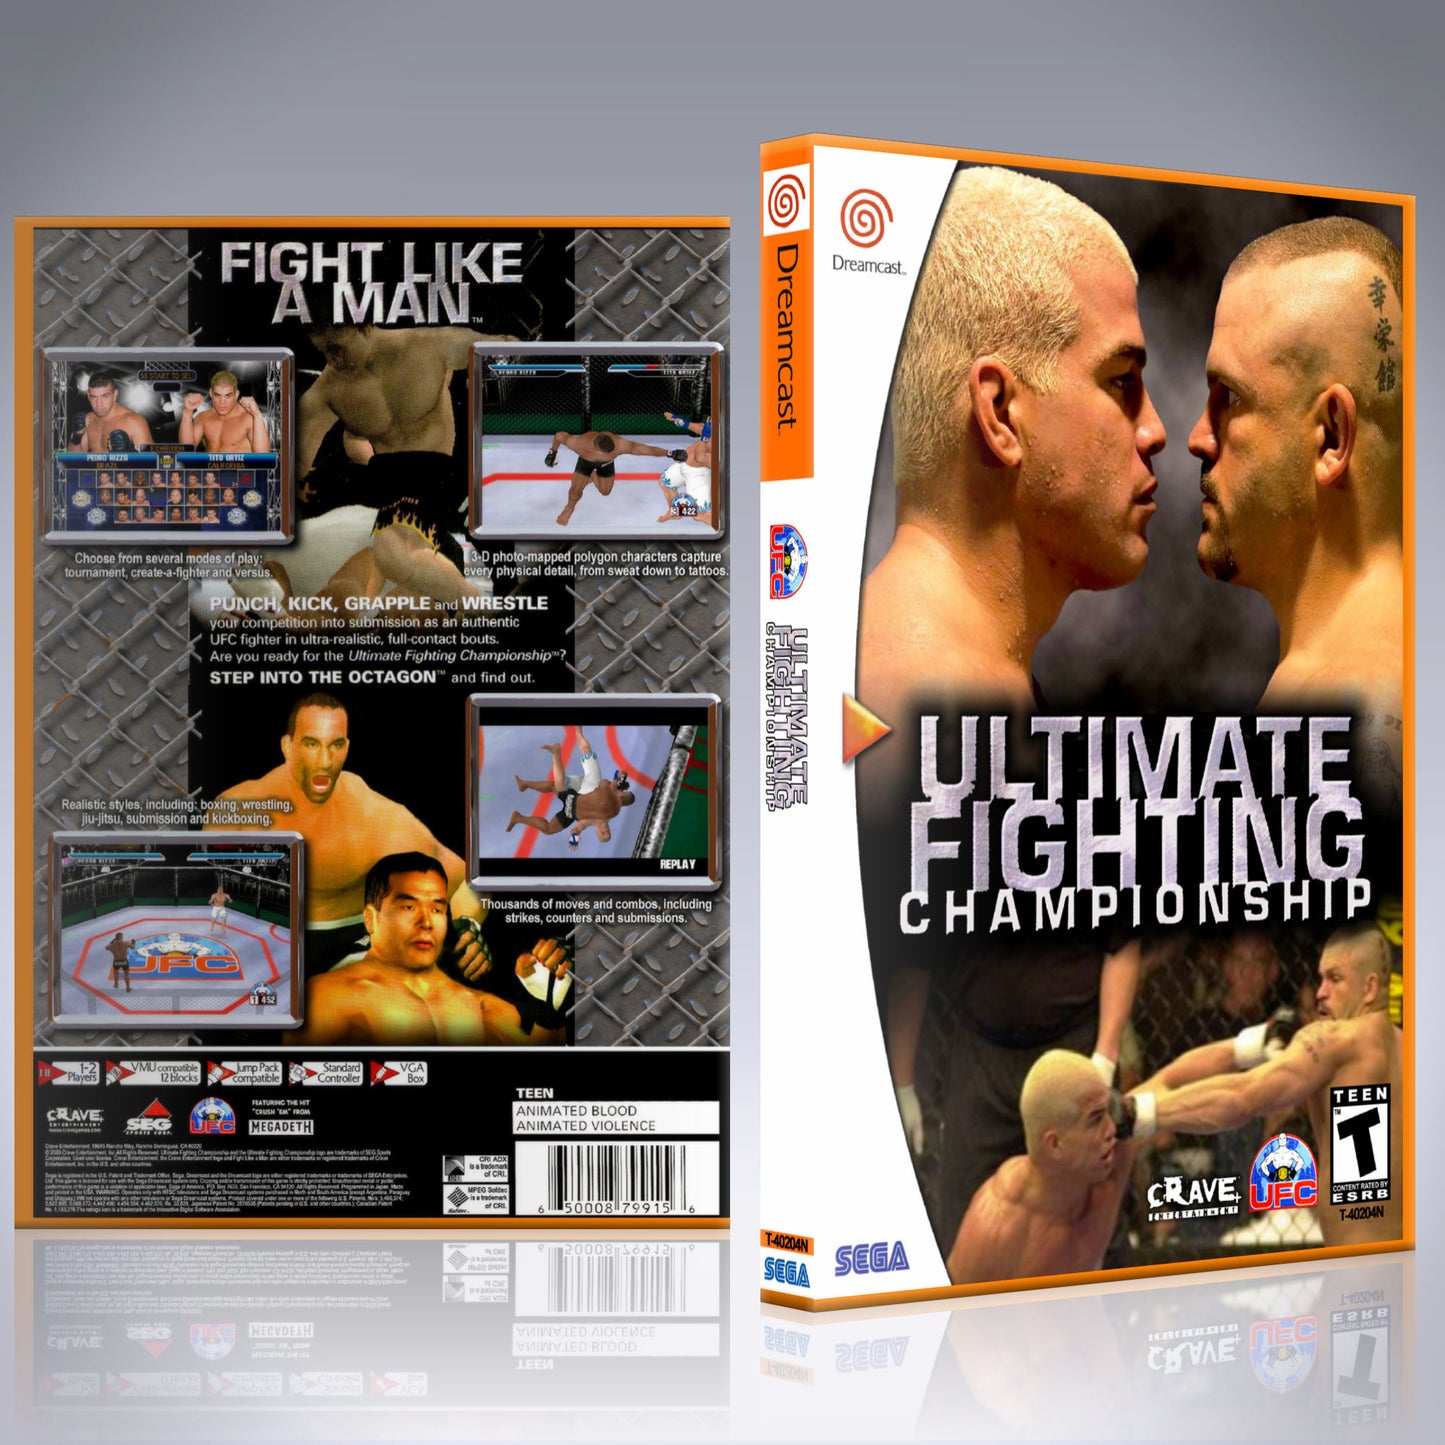 Dreamcast Custom Case - NO GAME - Ultimate Fighting Championship